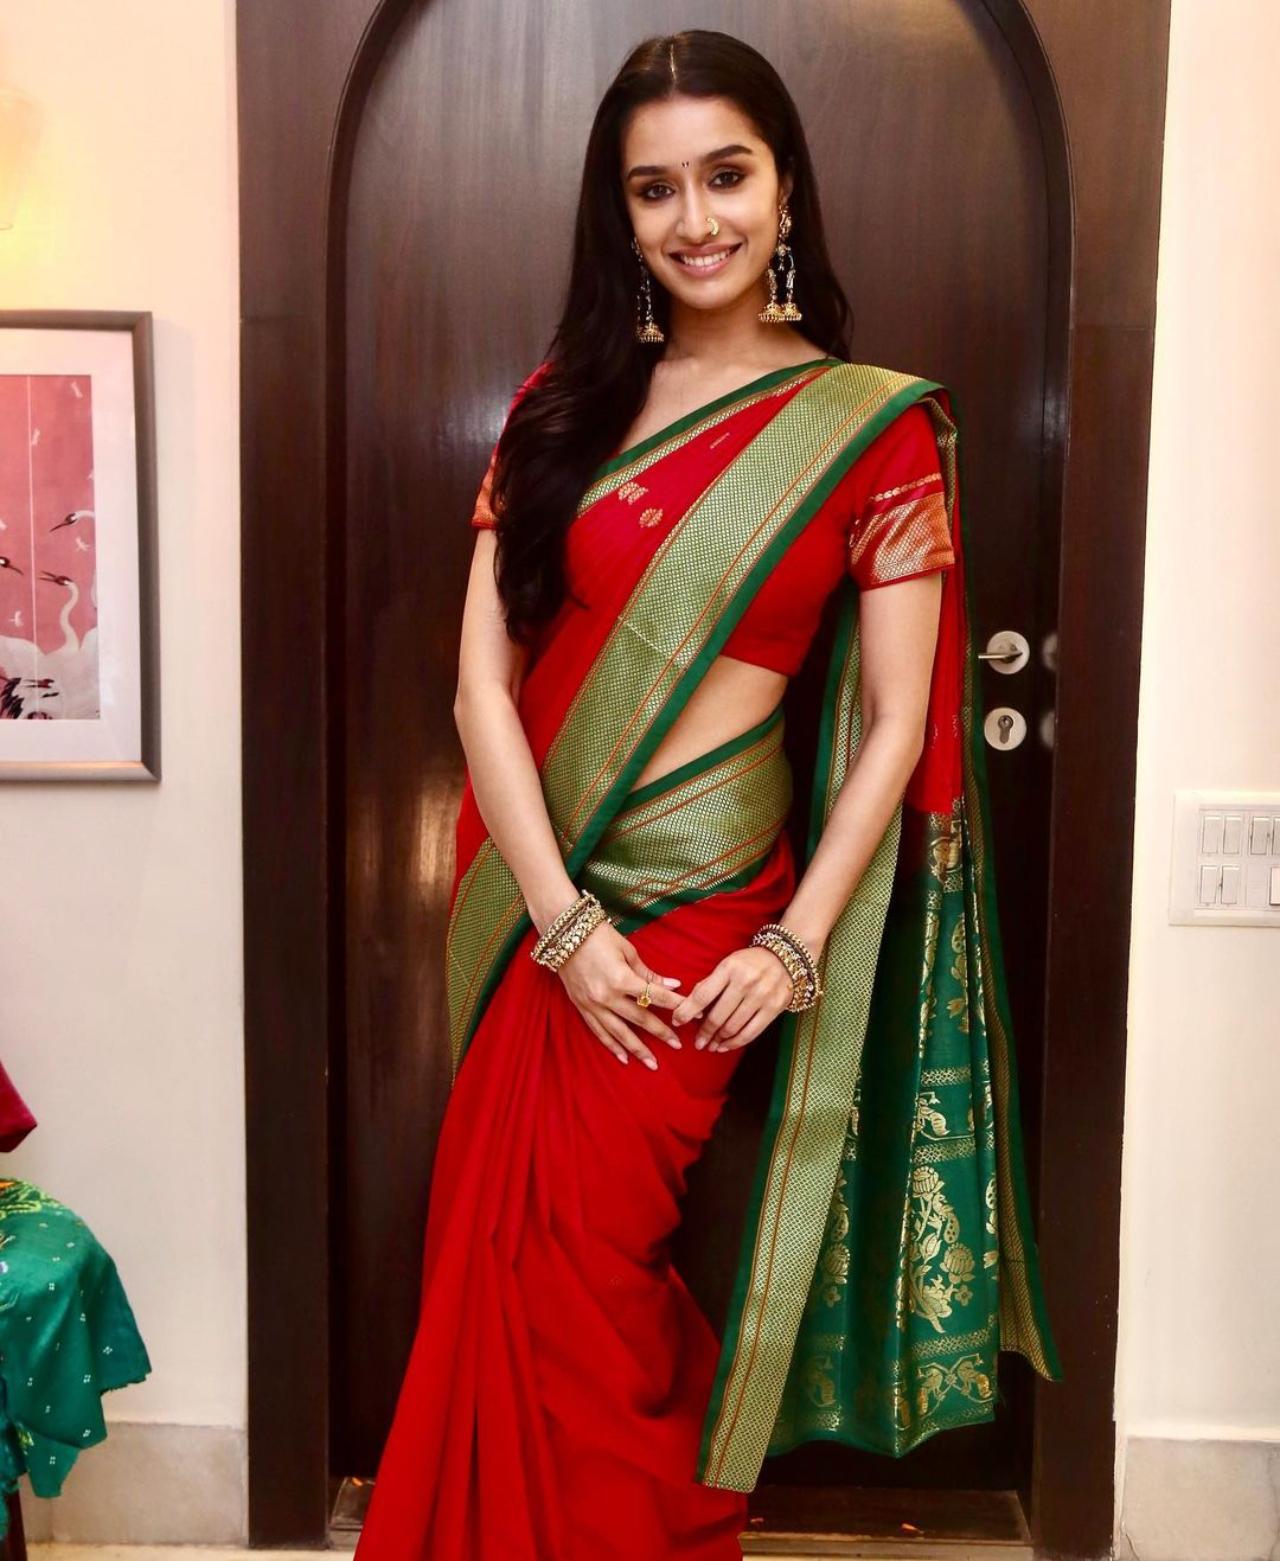 Shraddha looked gorgeous in a red and green traditional saree. She completed her look with traditional jewellery including golden jhumkas, a nose ring, and bangles. She left her hair open and wore a bindi as well